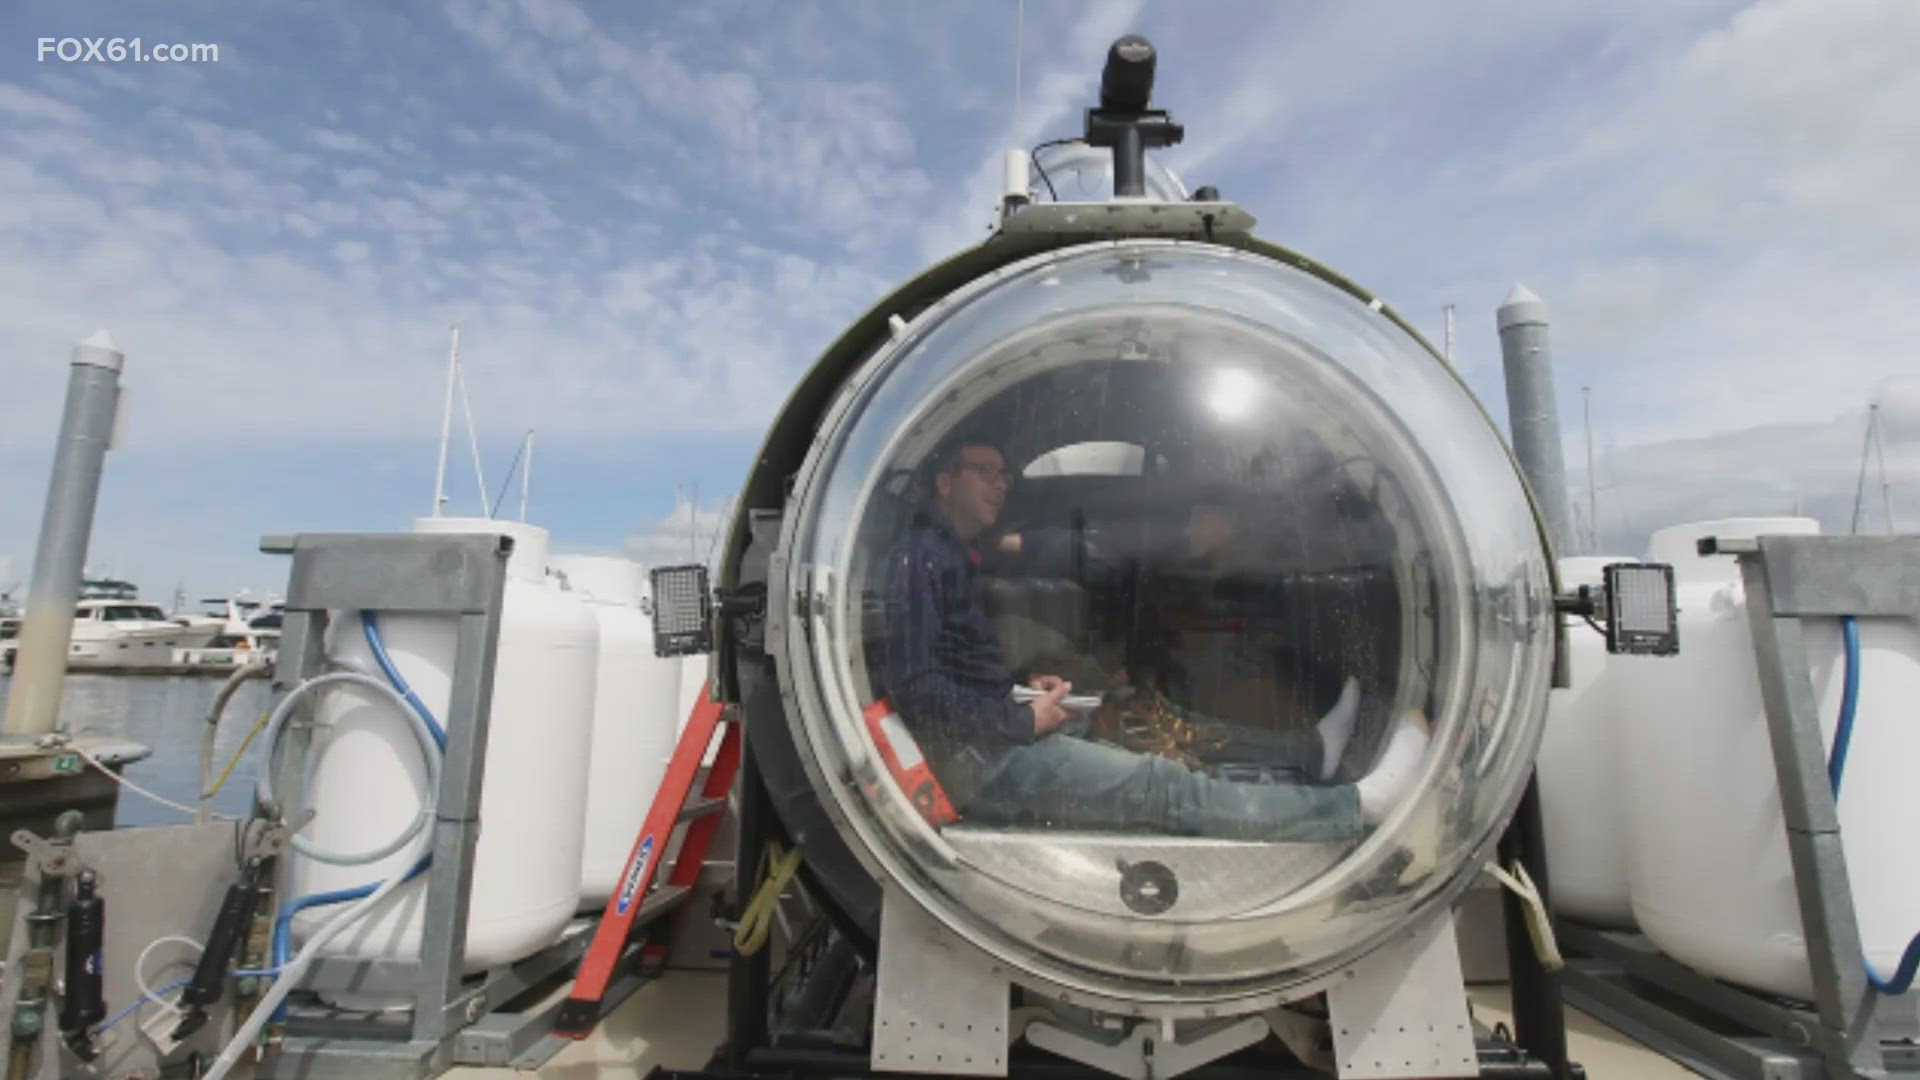 OceanGate Expeditions confirmed the search for its five-person submersible and said its focus was on those aboard the vessel and their families.